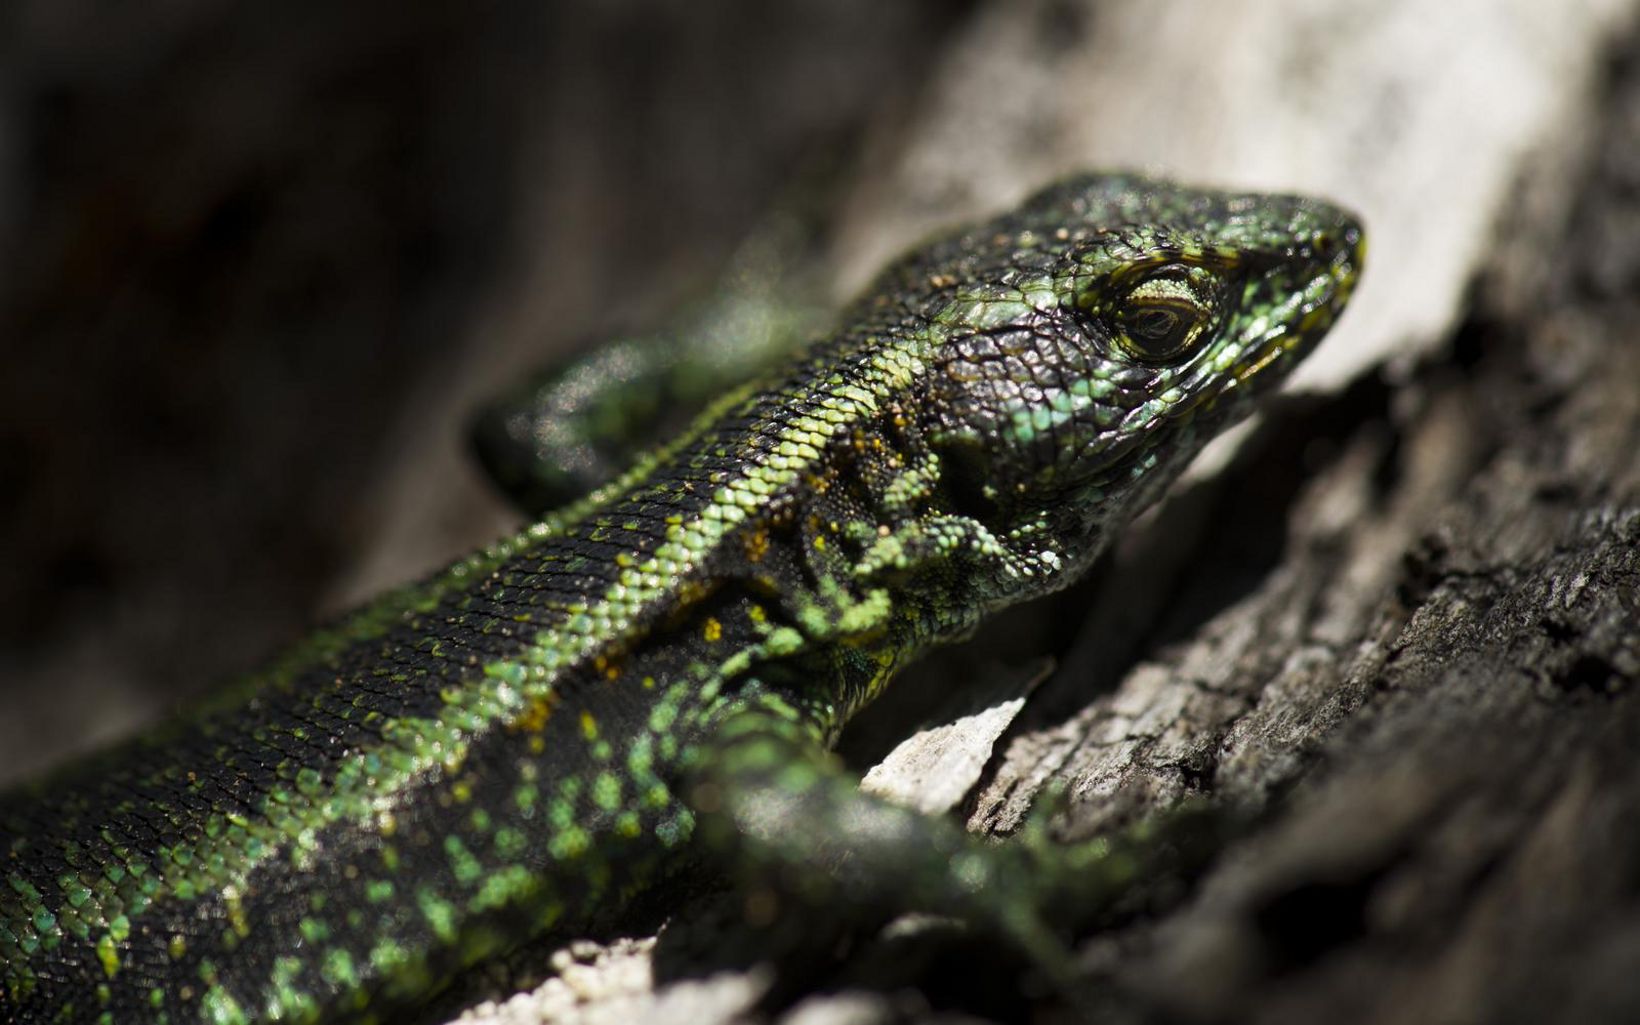 (ALL INTERNAL RIGHTS, LIMITED EXTERNAL RIGHTS) March 2012. Green lizard (unknown species) basking in the sun in the Alerce Coastal National Park, Los Rios, Chile. Photo credit: ©2012 Nick Hall